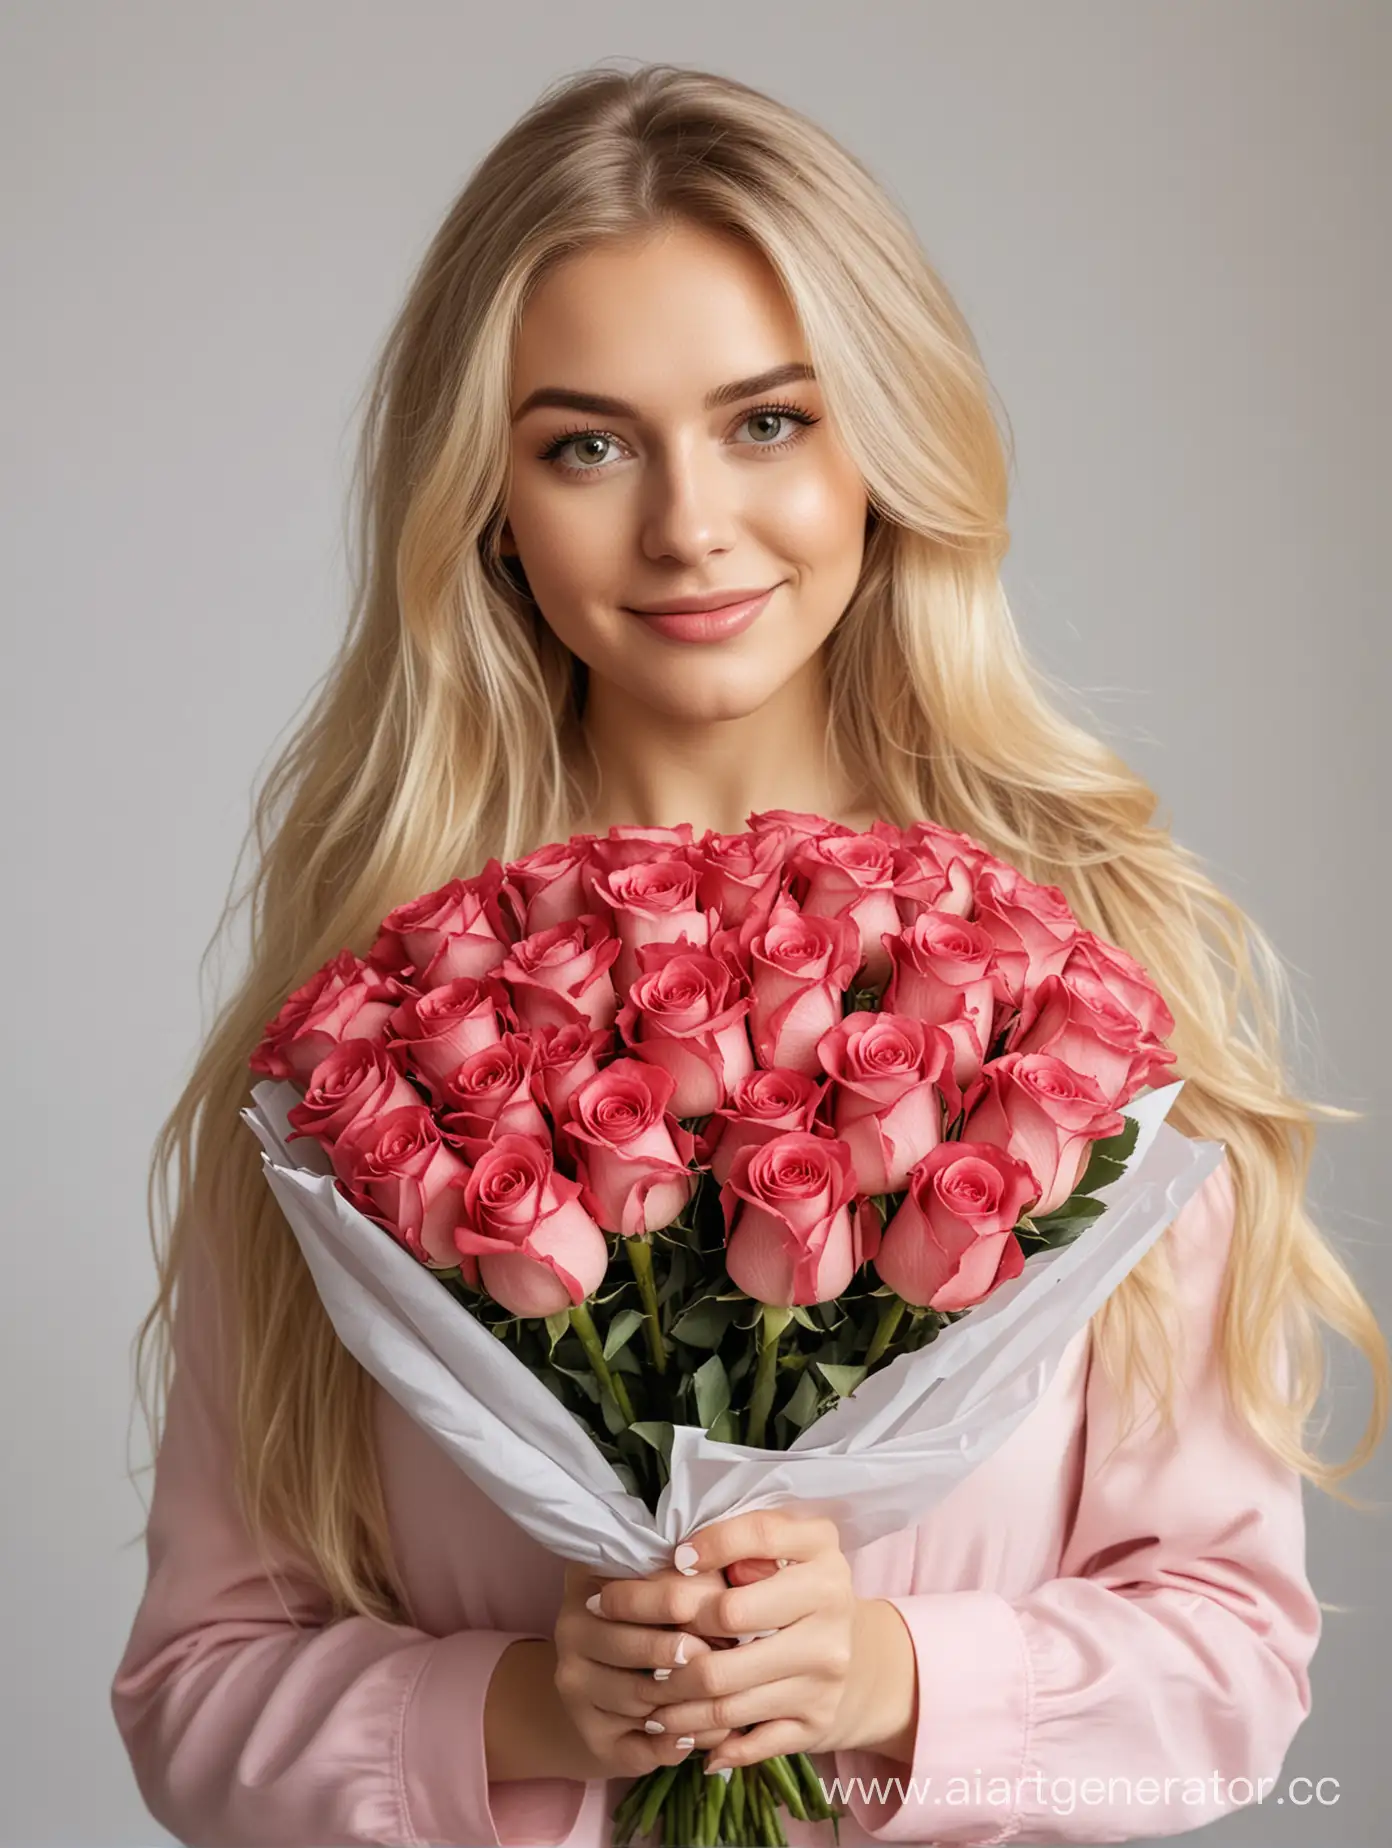 Blonde-Woman-Holding-Bouquet-of-50-Roses